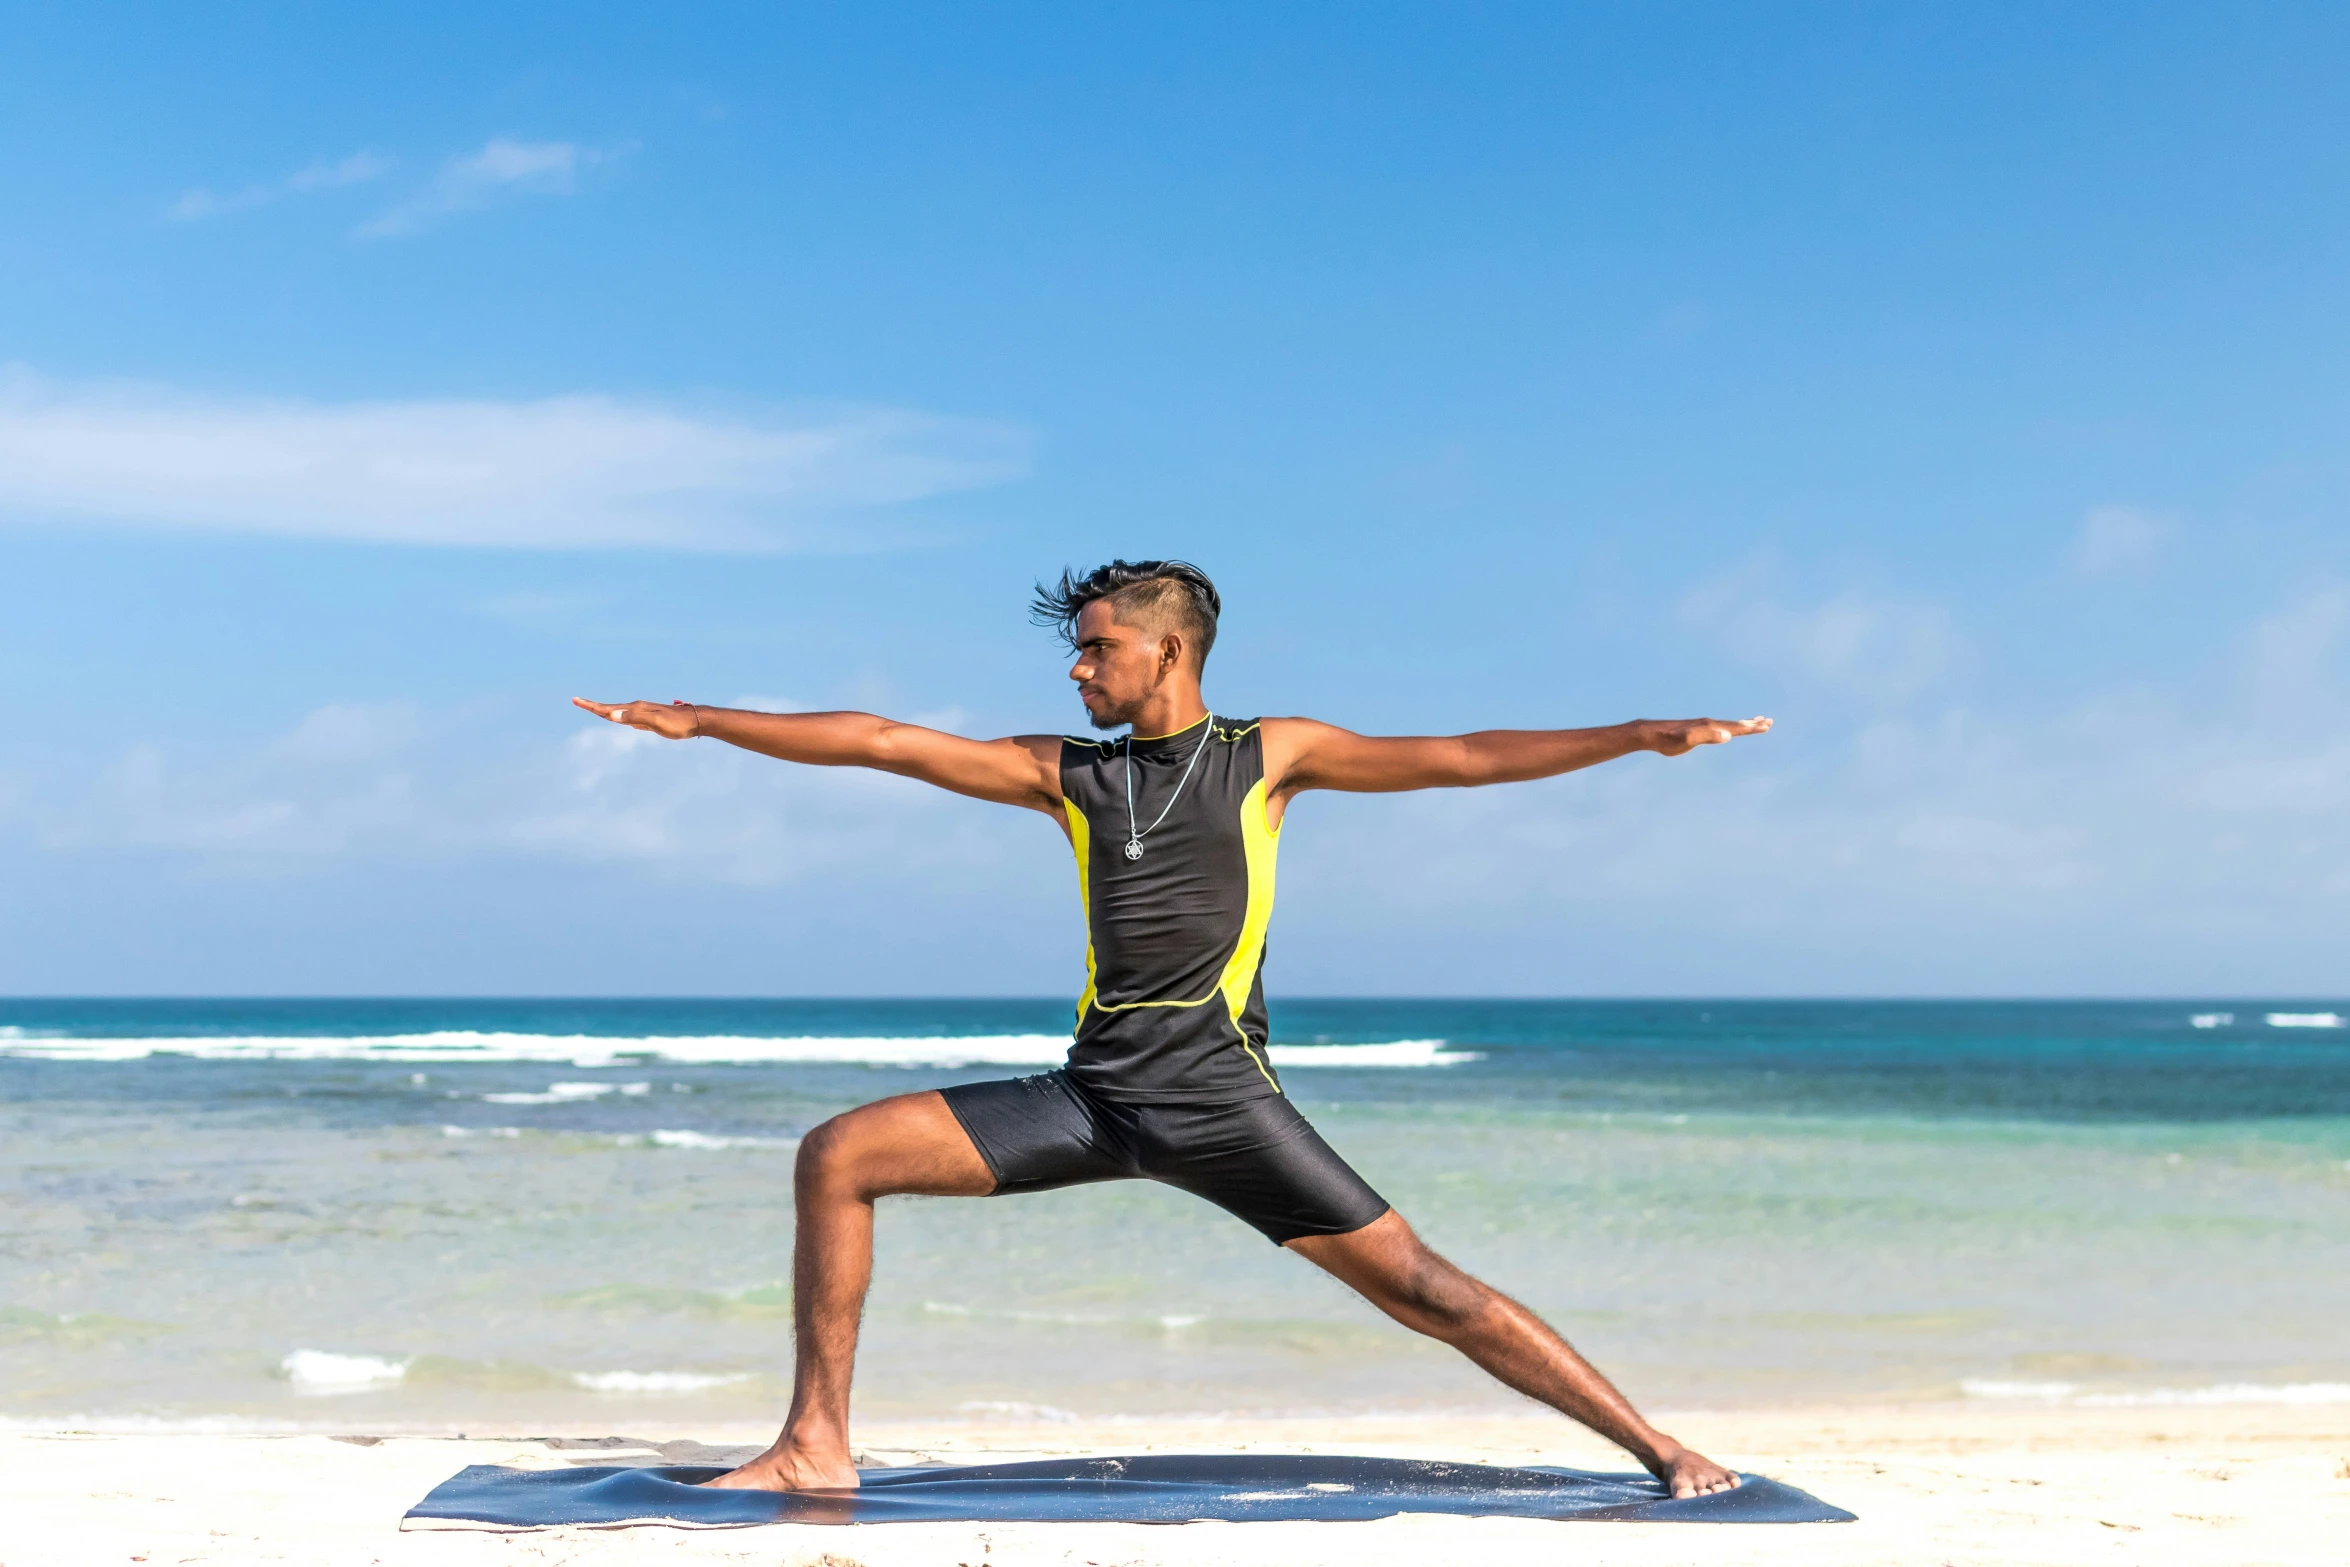 a person with their arms outstretched doing a yoga pose on the beach